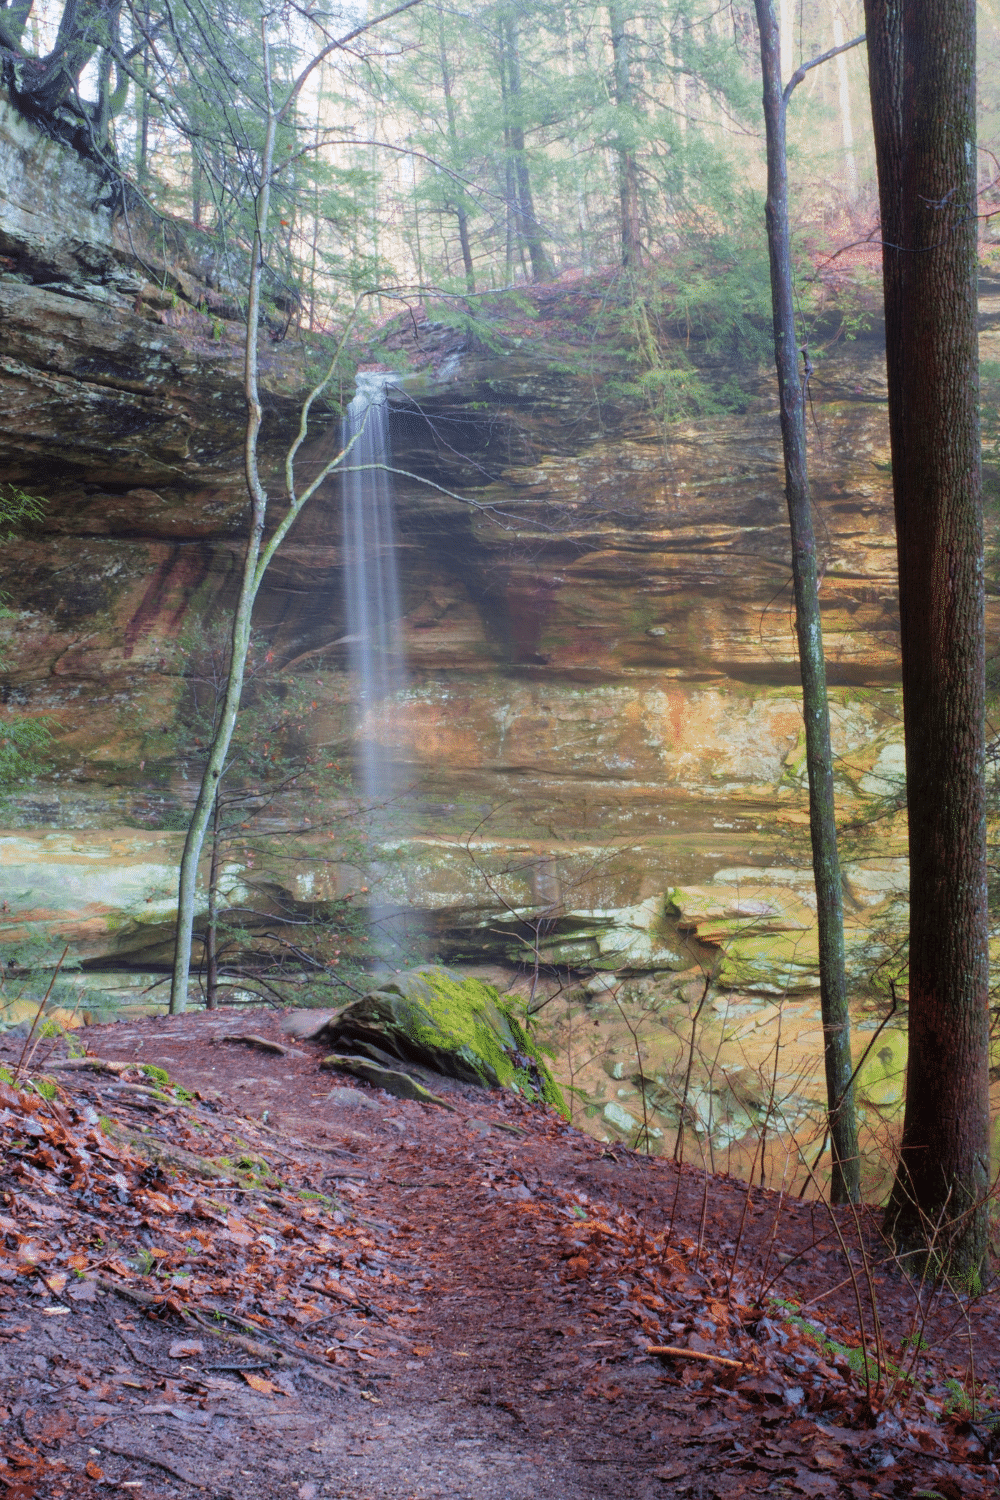 A waterfall in a wooded area with lots of coloured leaves on the ground